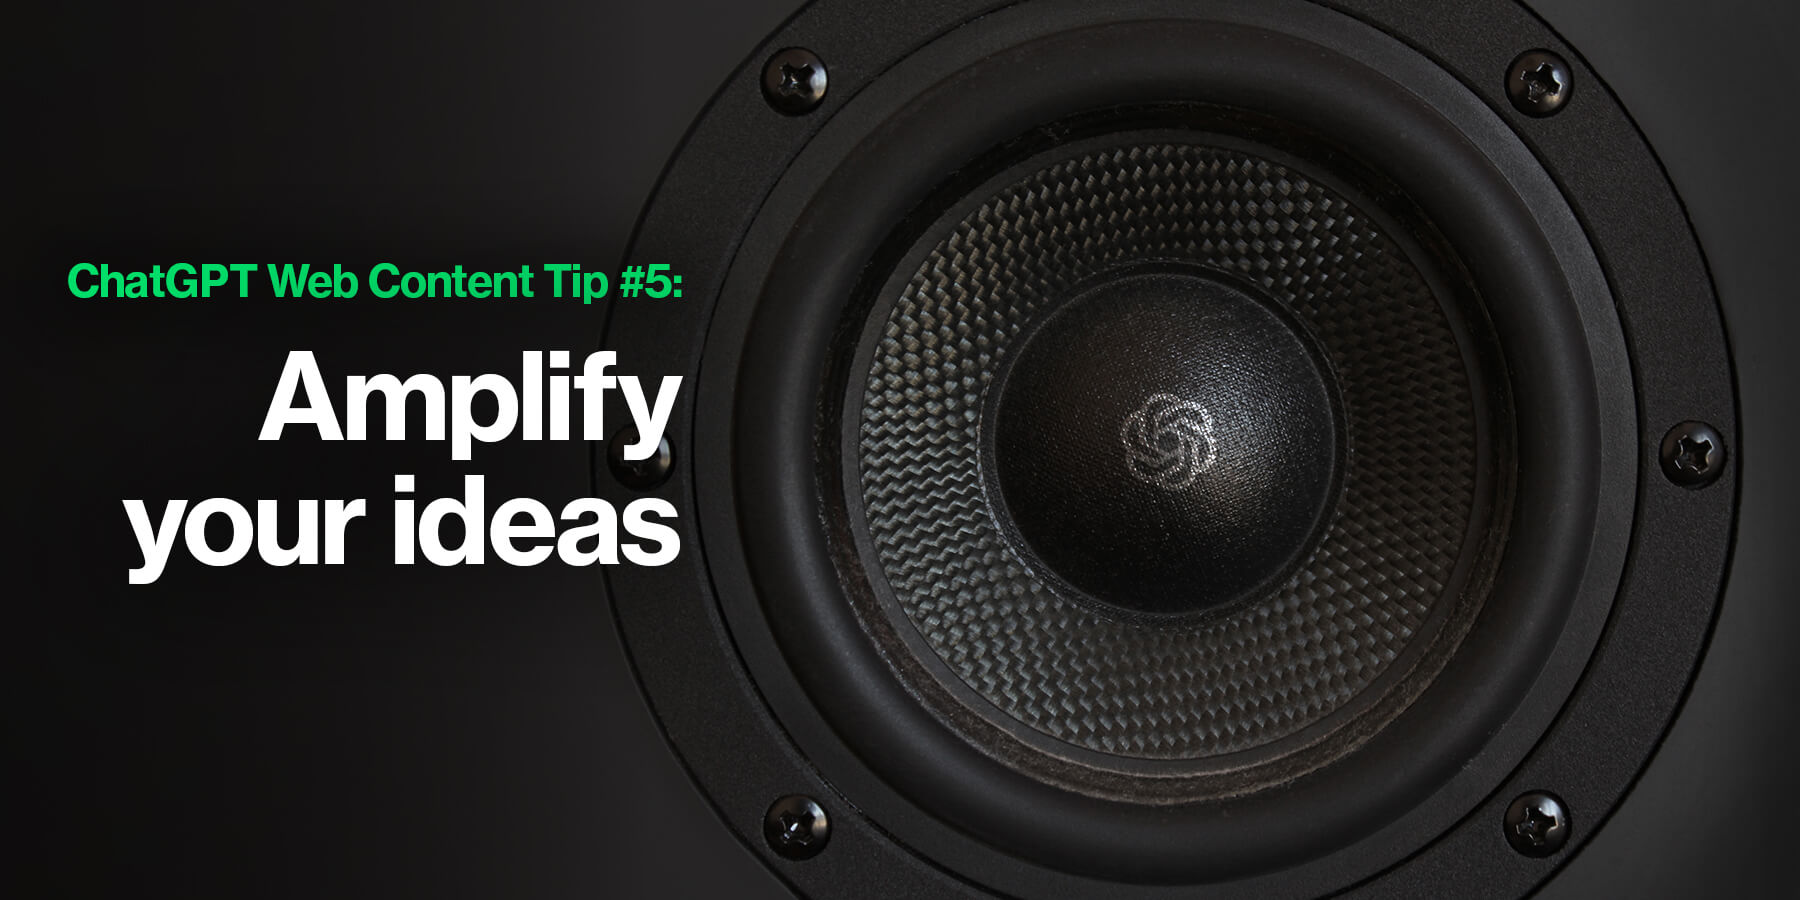 ChatGPT Web Content Tip #5: Use it to amplify your ideas